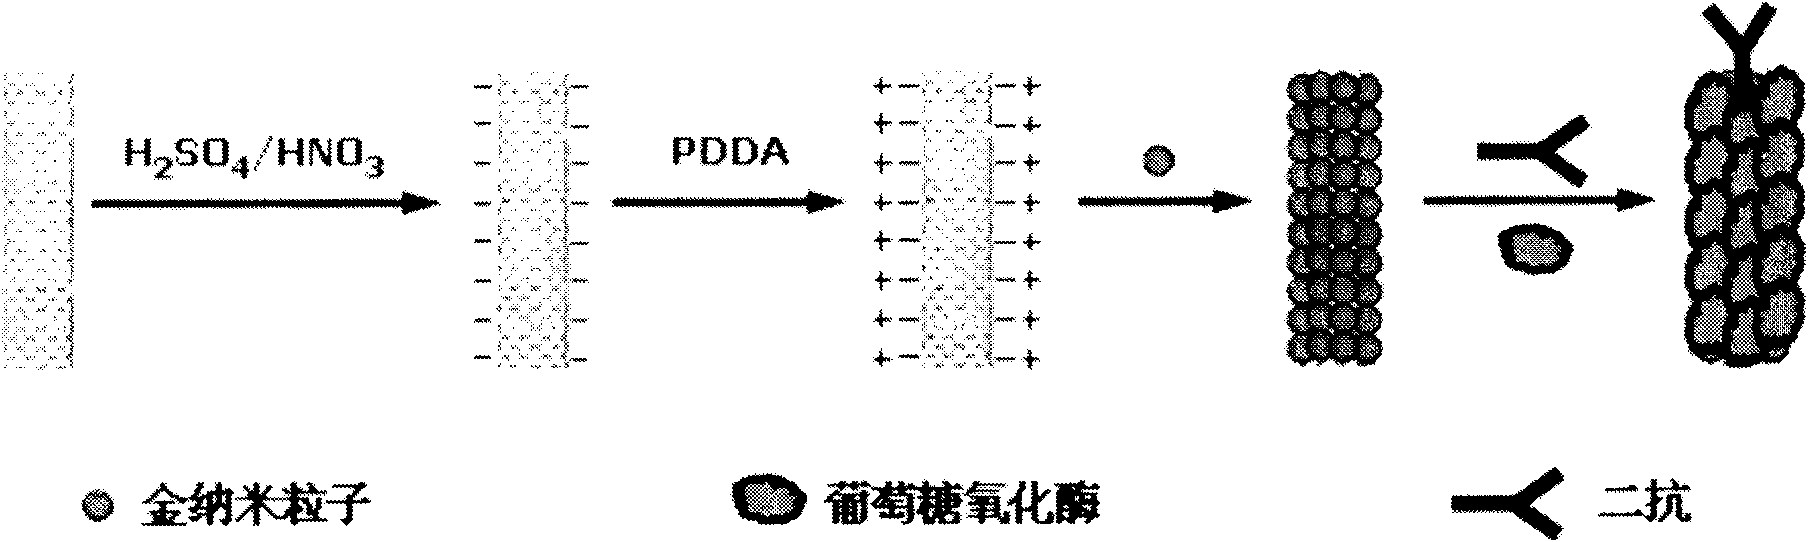 Disposable multi-channel electrochemical immunosensor with high sensitivity